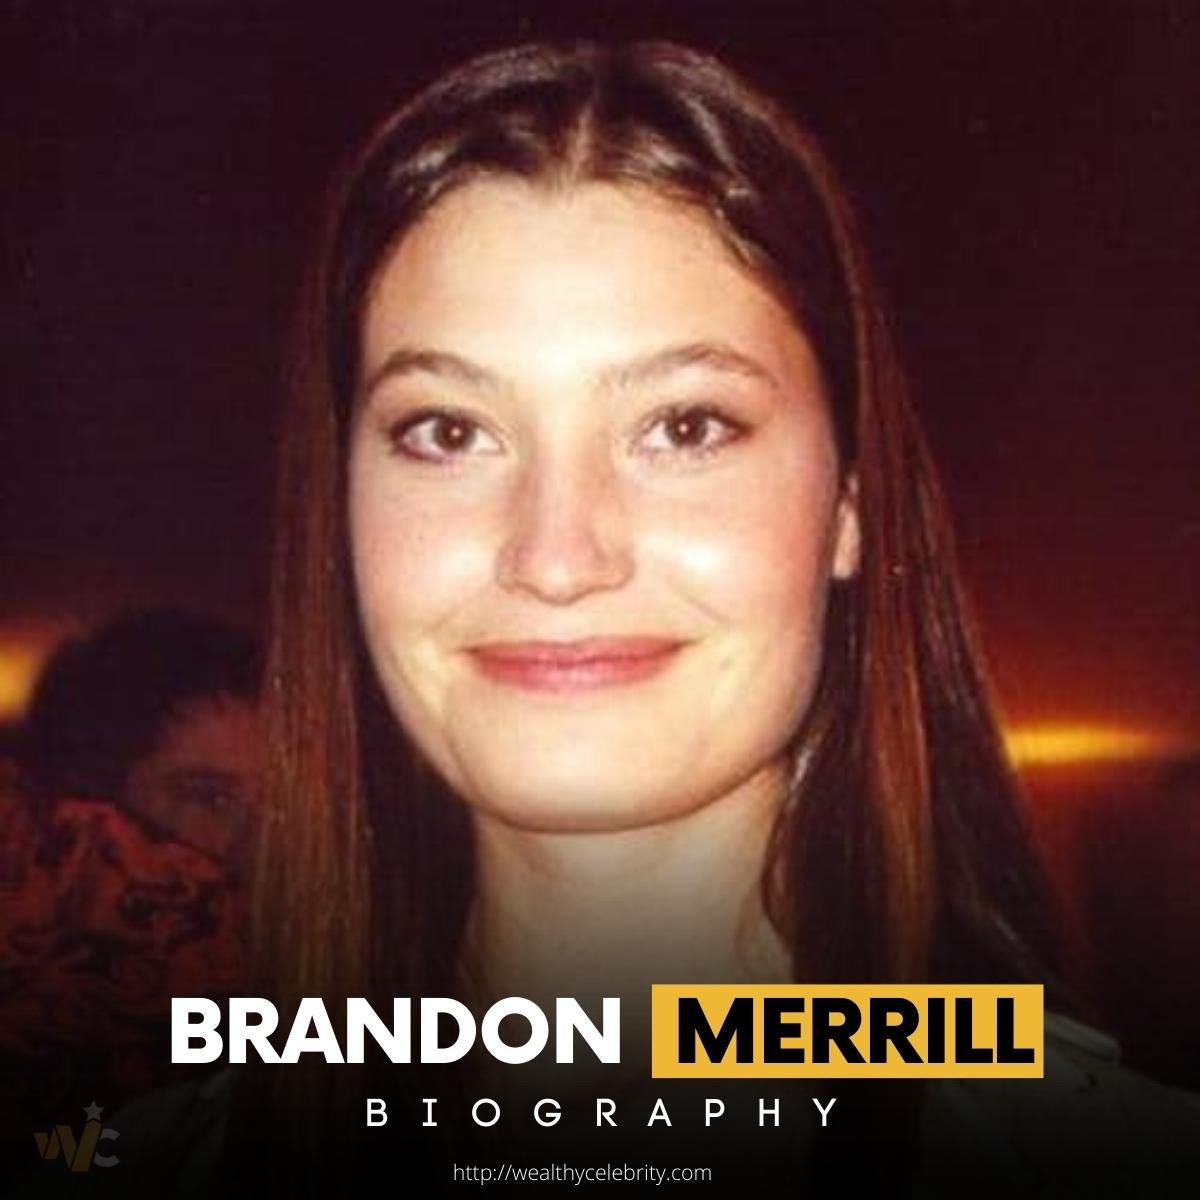 Who is Brandon Merrill? Interesting Facts About Shanghai Noon Actress